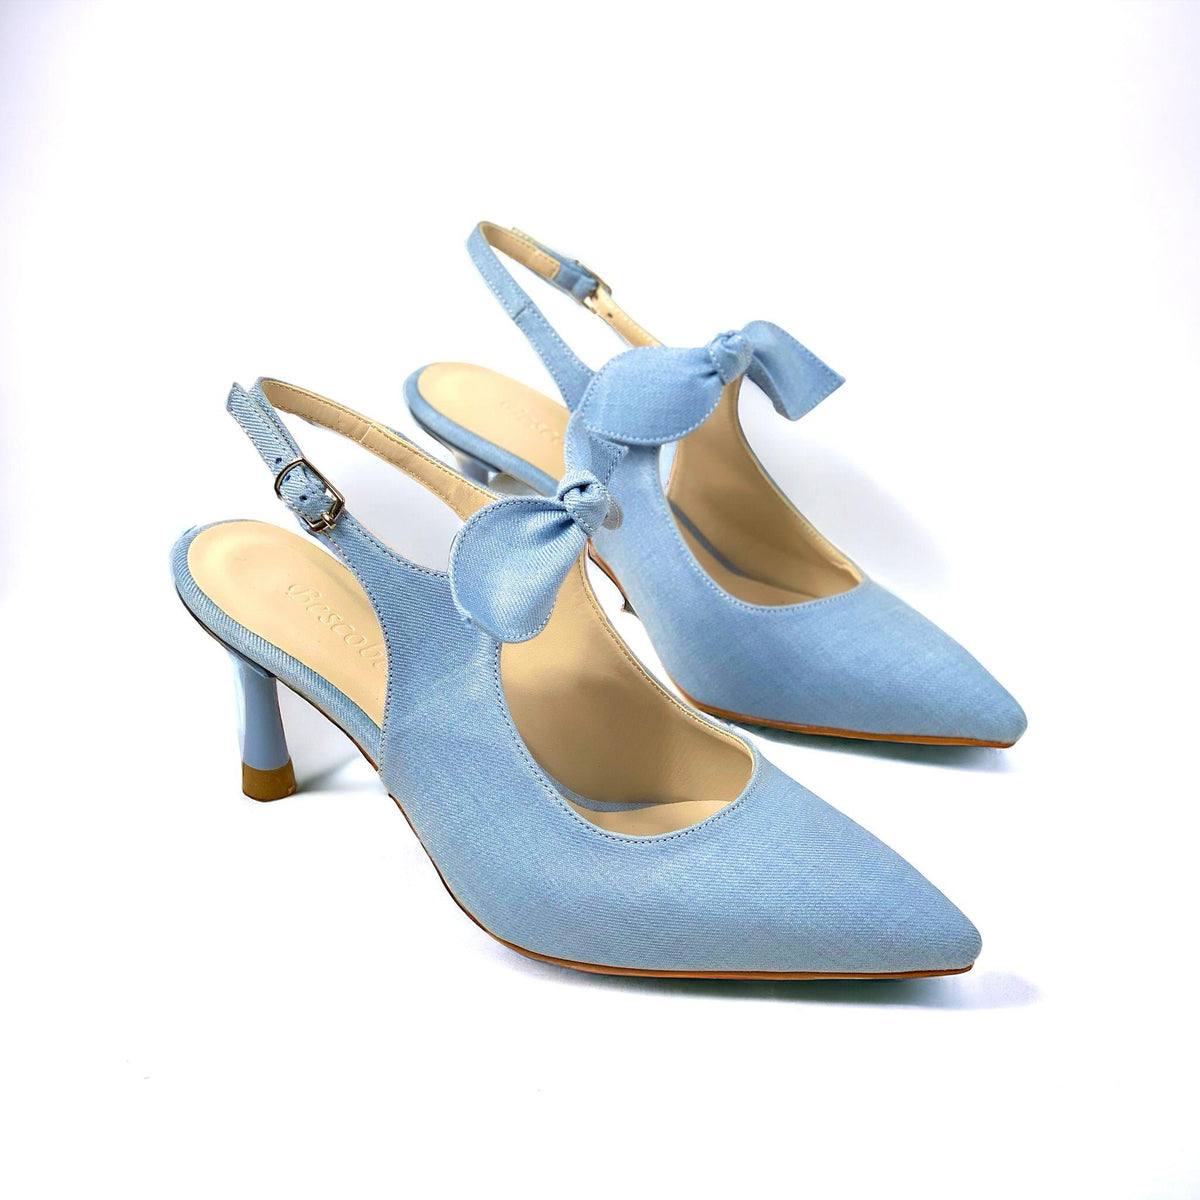 Women's Blue Denim Material Tanb Bow Detailed Heeled Pointed Toe Shoes 7 cm Heel - STREETMODE™